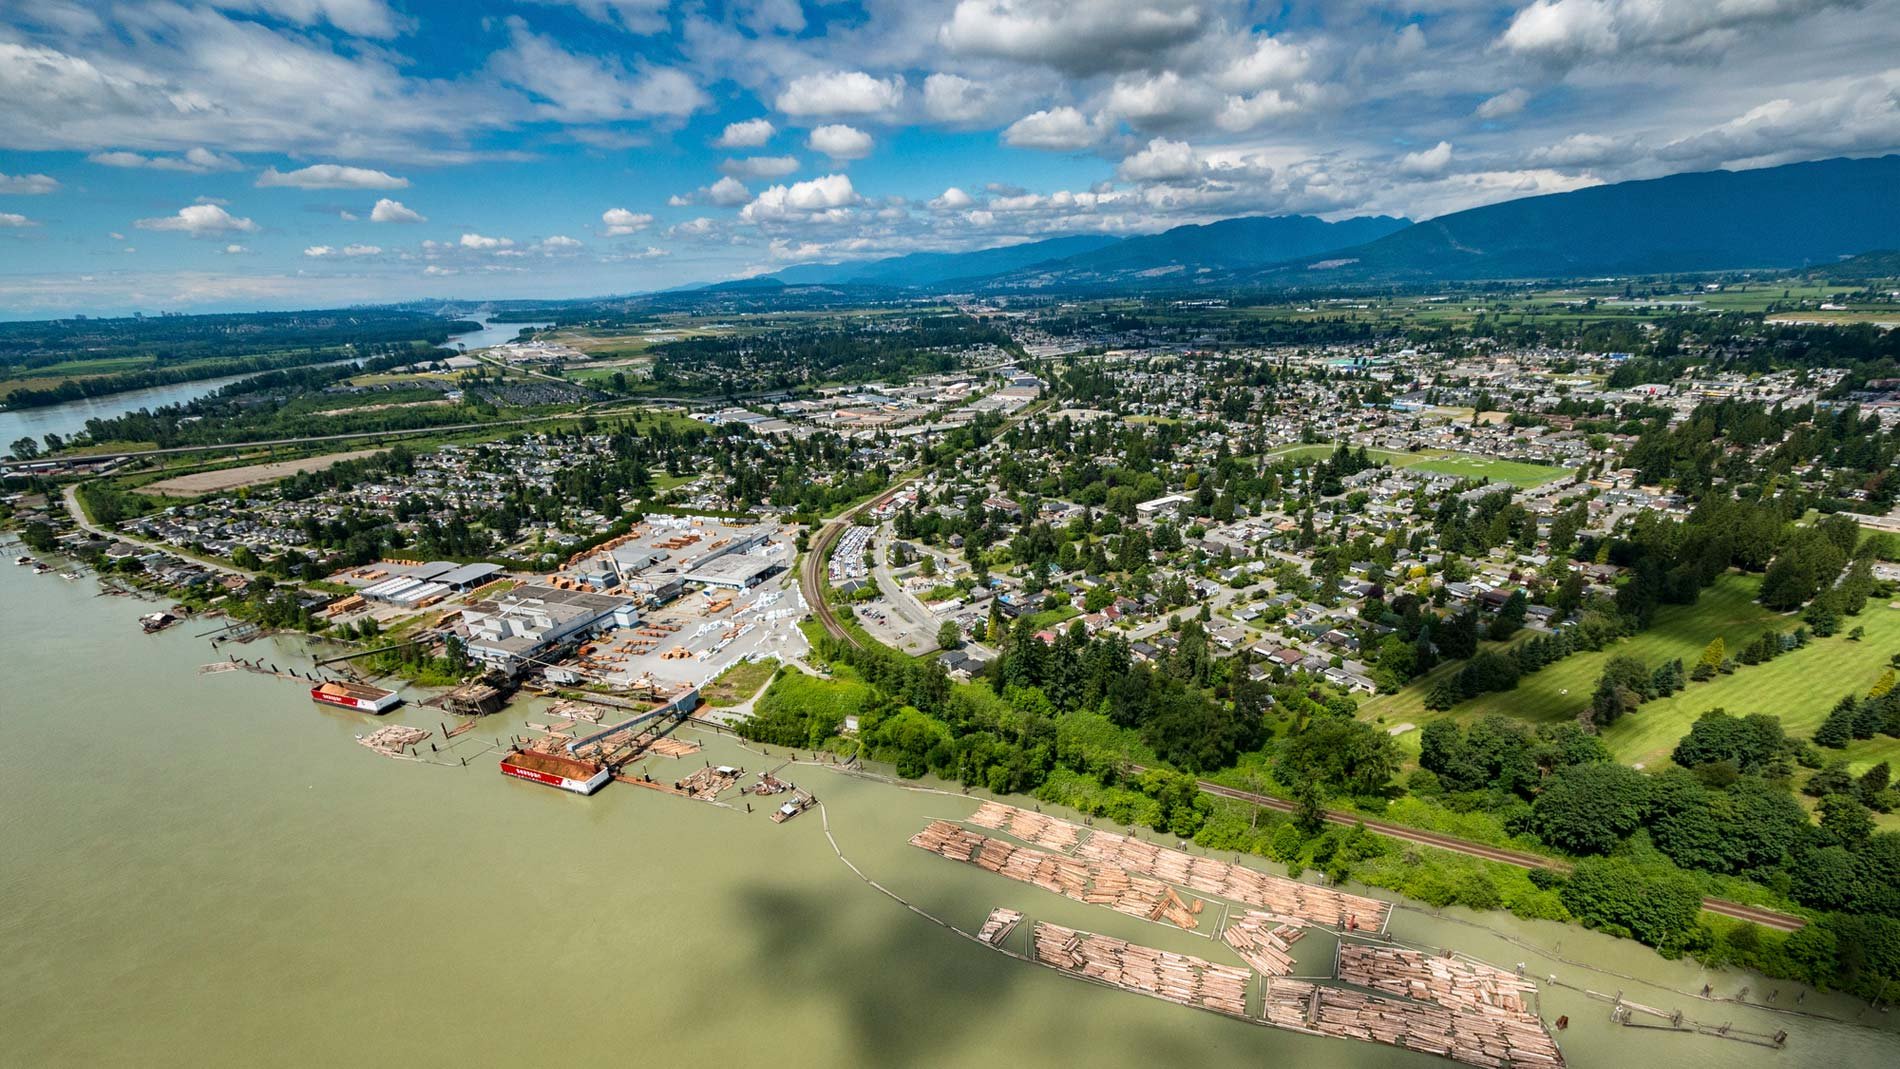 Aerial view of river along town of Maple Ridge, British Columbia, with mountain range in background.